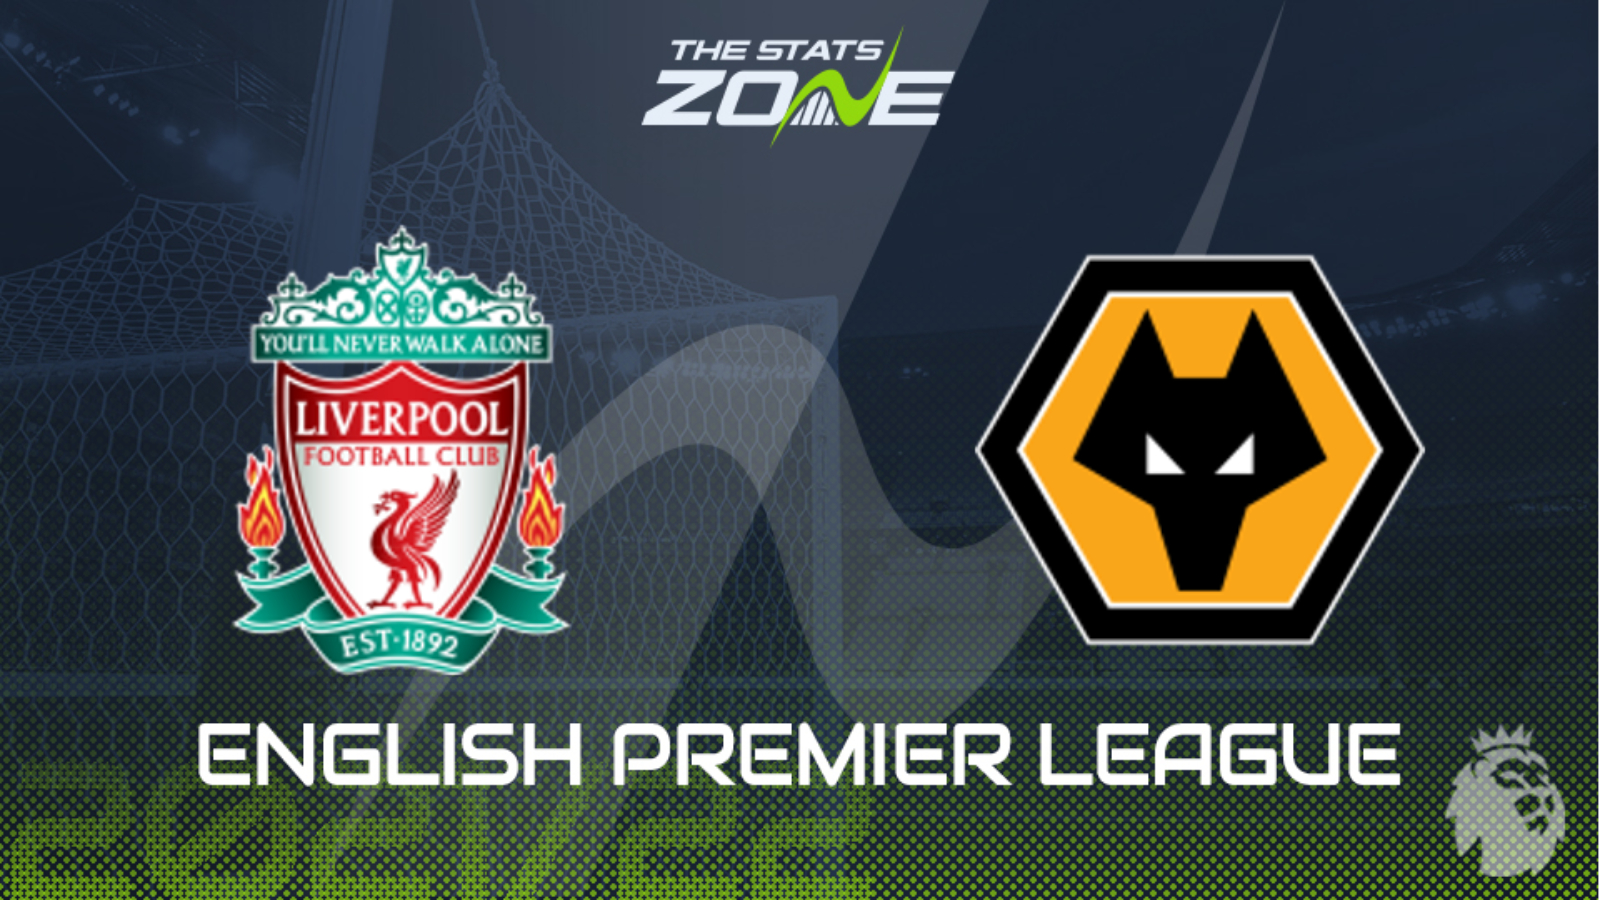 Liverpool vs Wolves Preview & Prediction - The Stats Zone